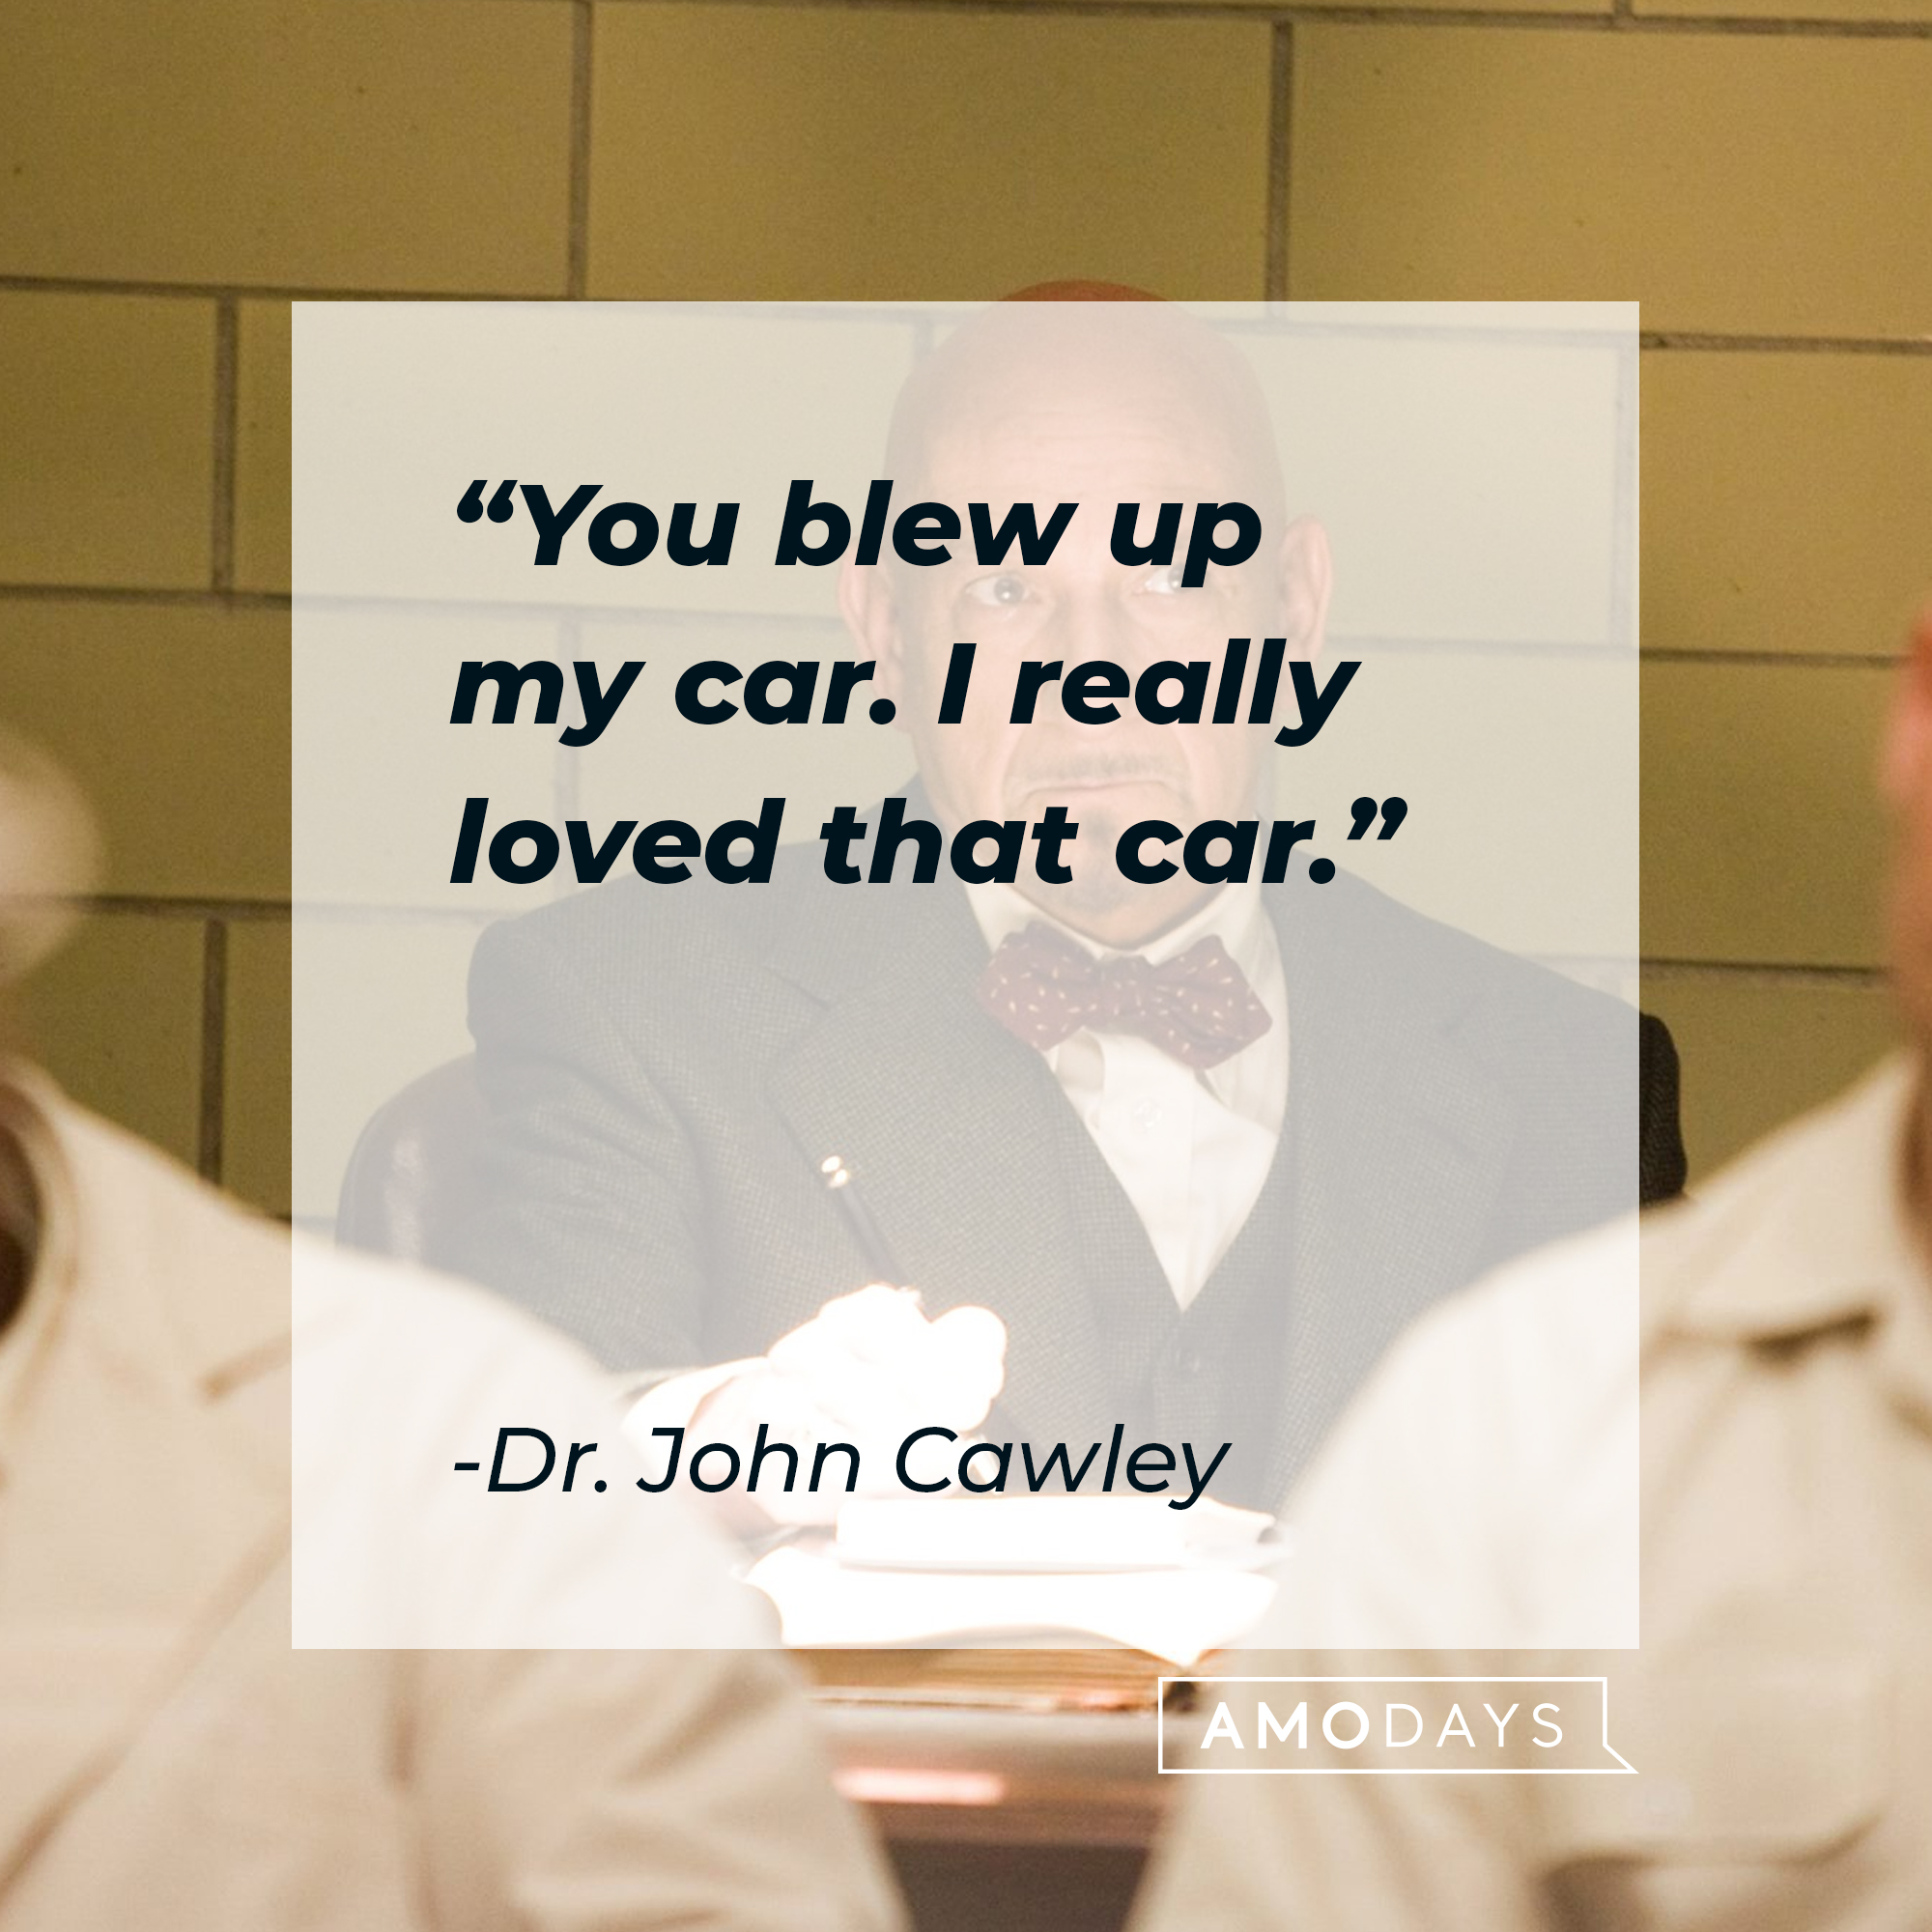 Dr. John Cawley's quote: "You blew up my car. I really loved that car." | Source: facebook.com/ShutterIsland